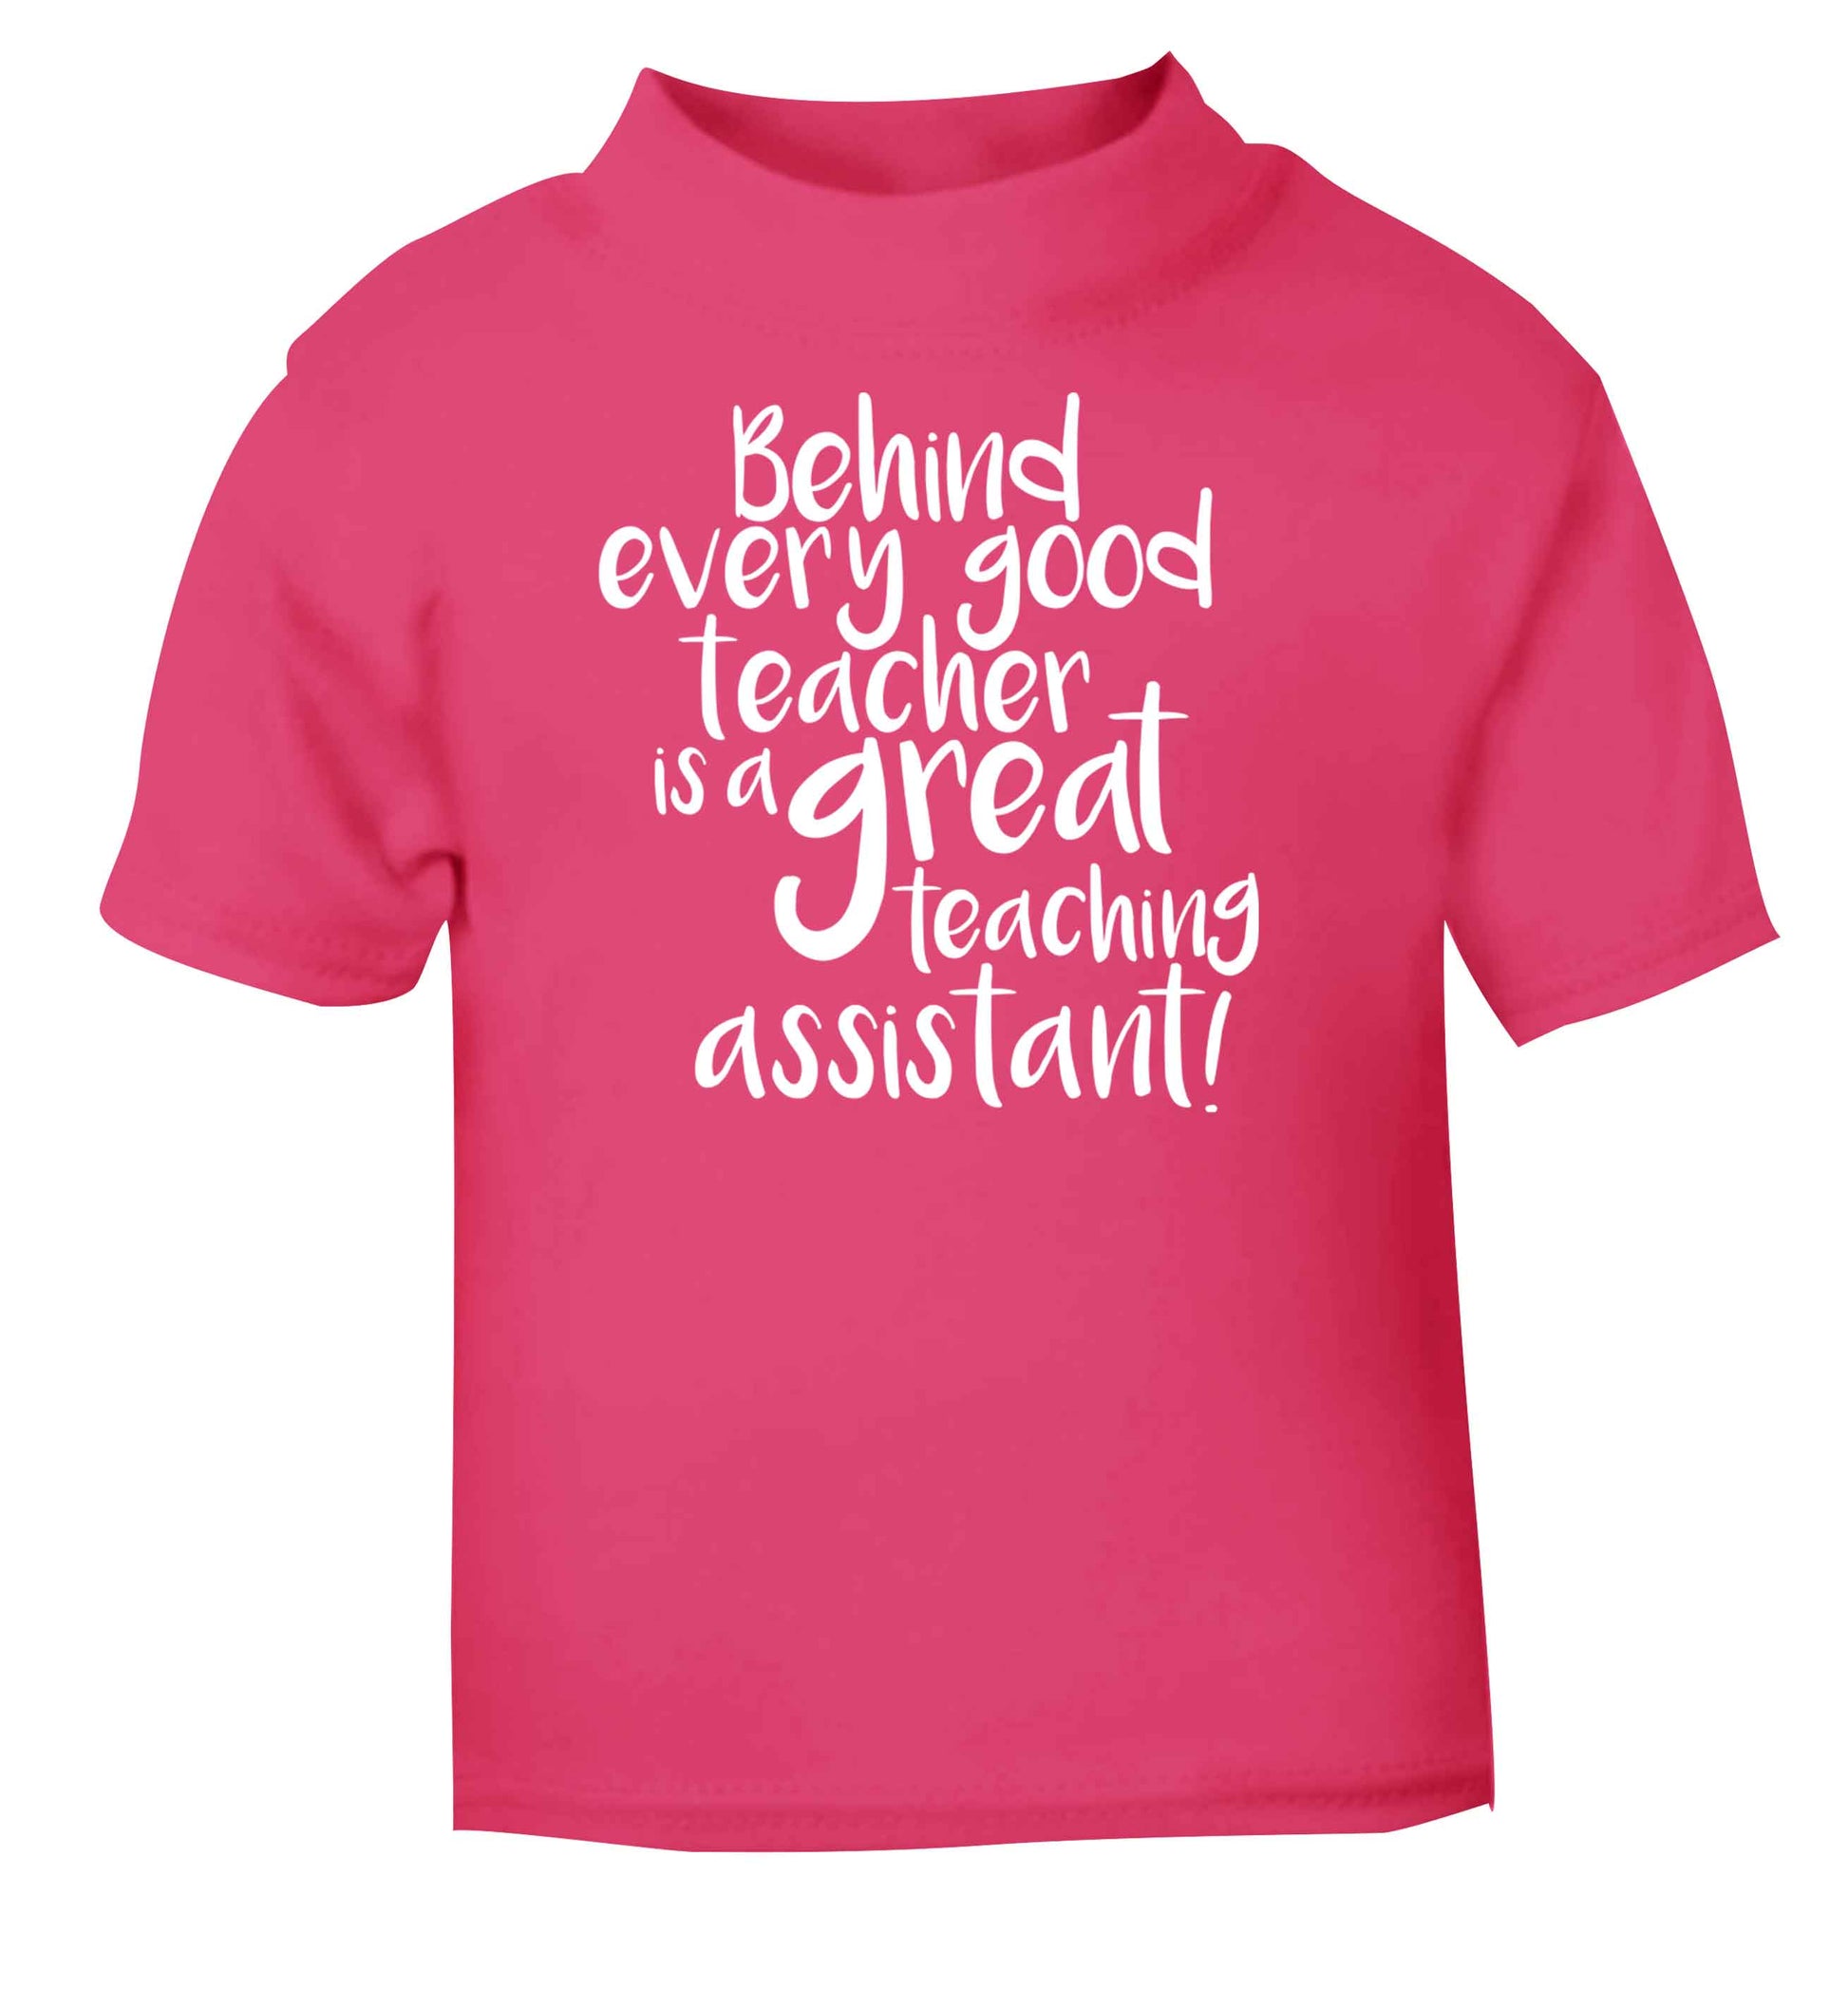 Behind every good teacher is a great teaching assistant pink baby toddler Tshirt 2 Years